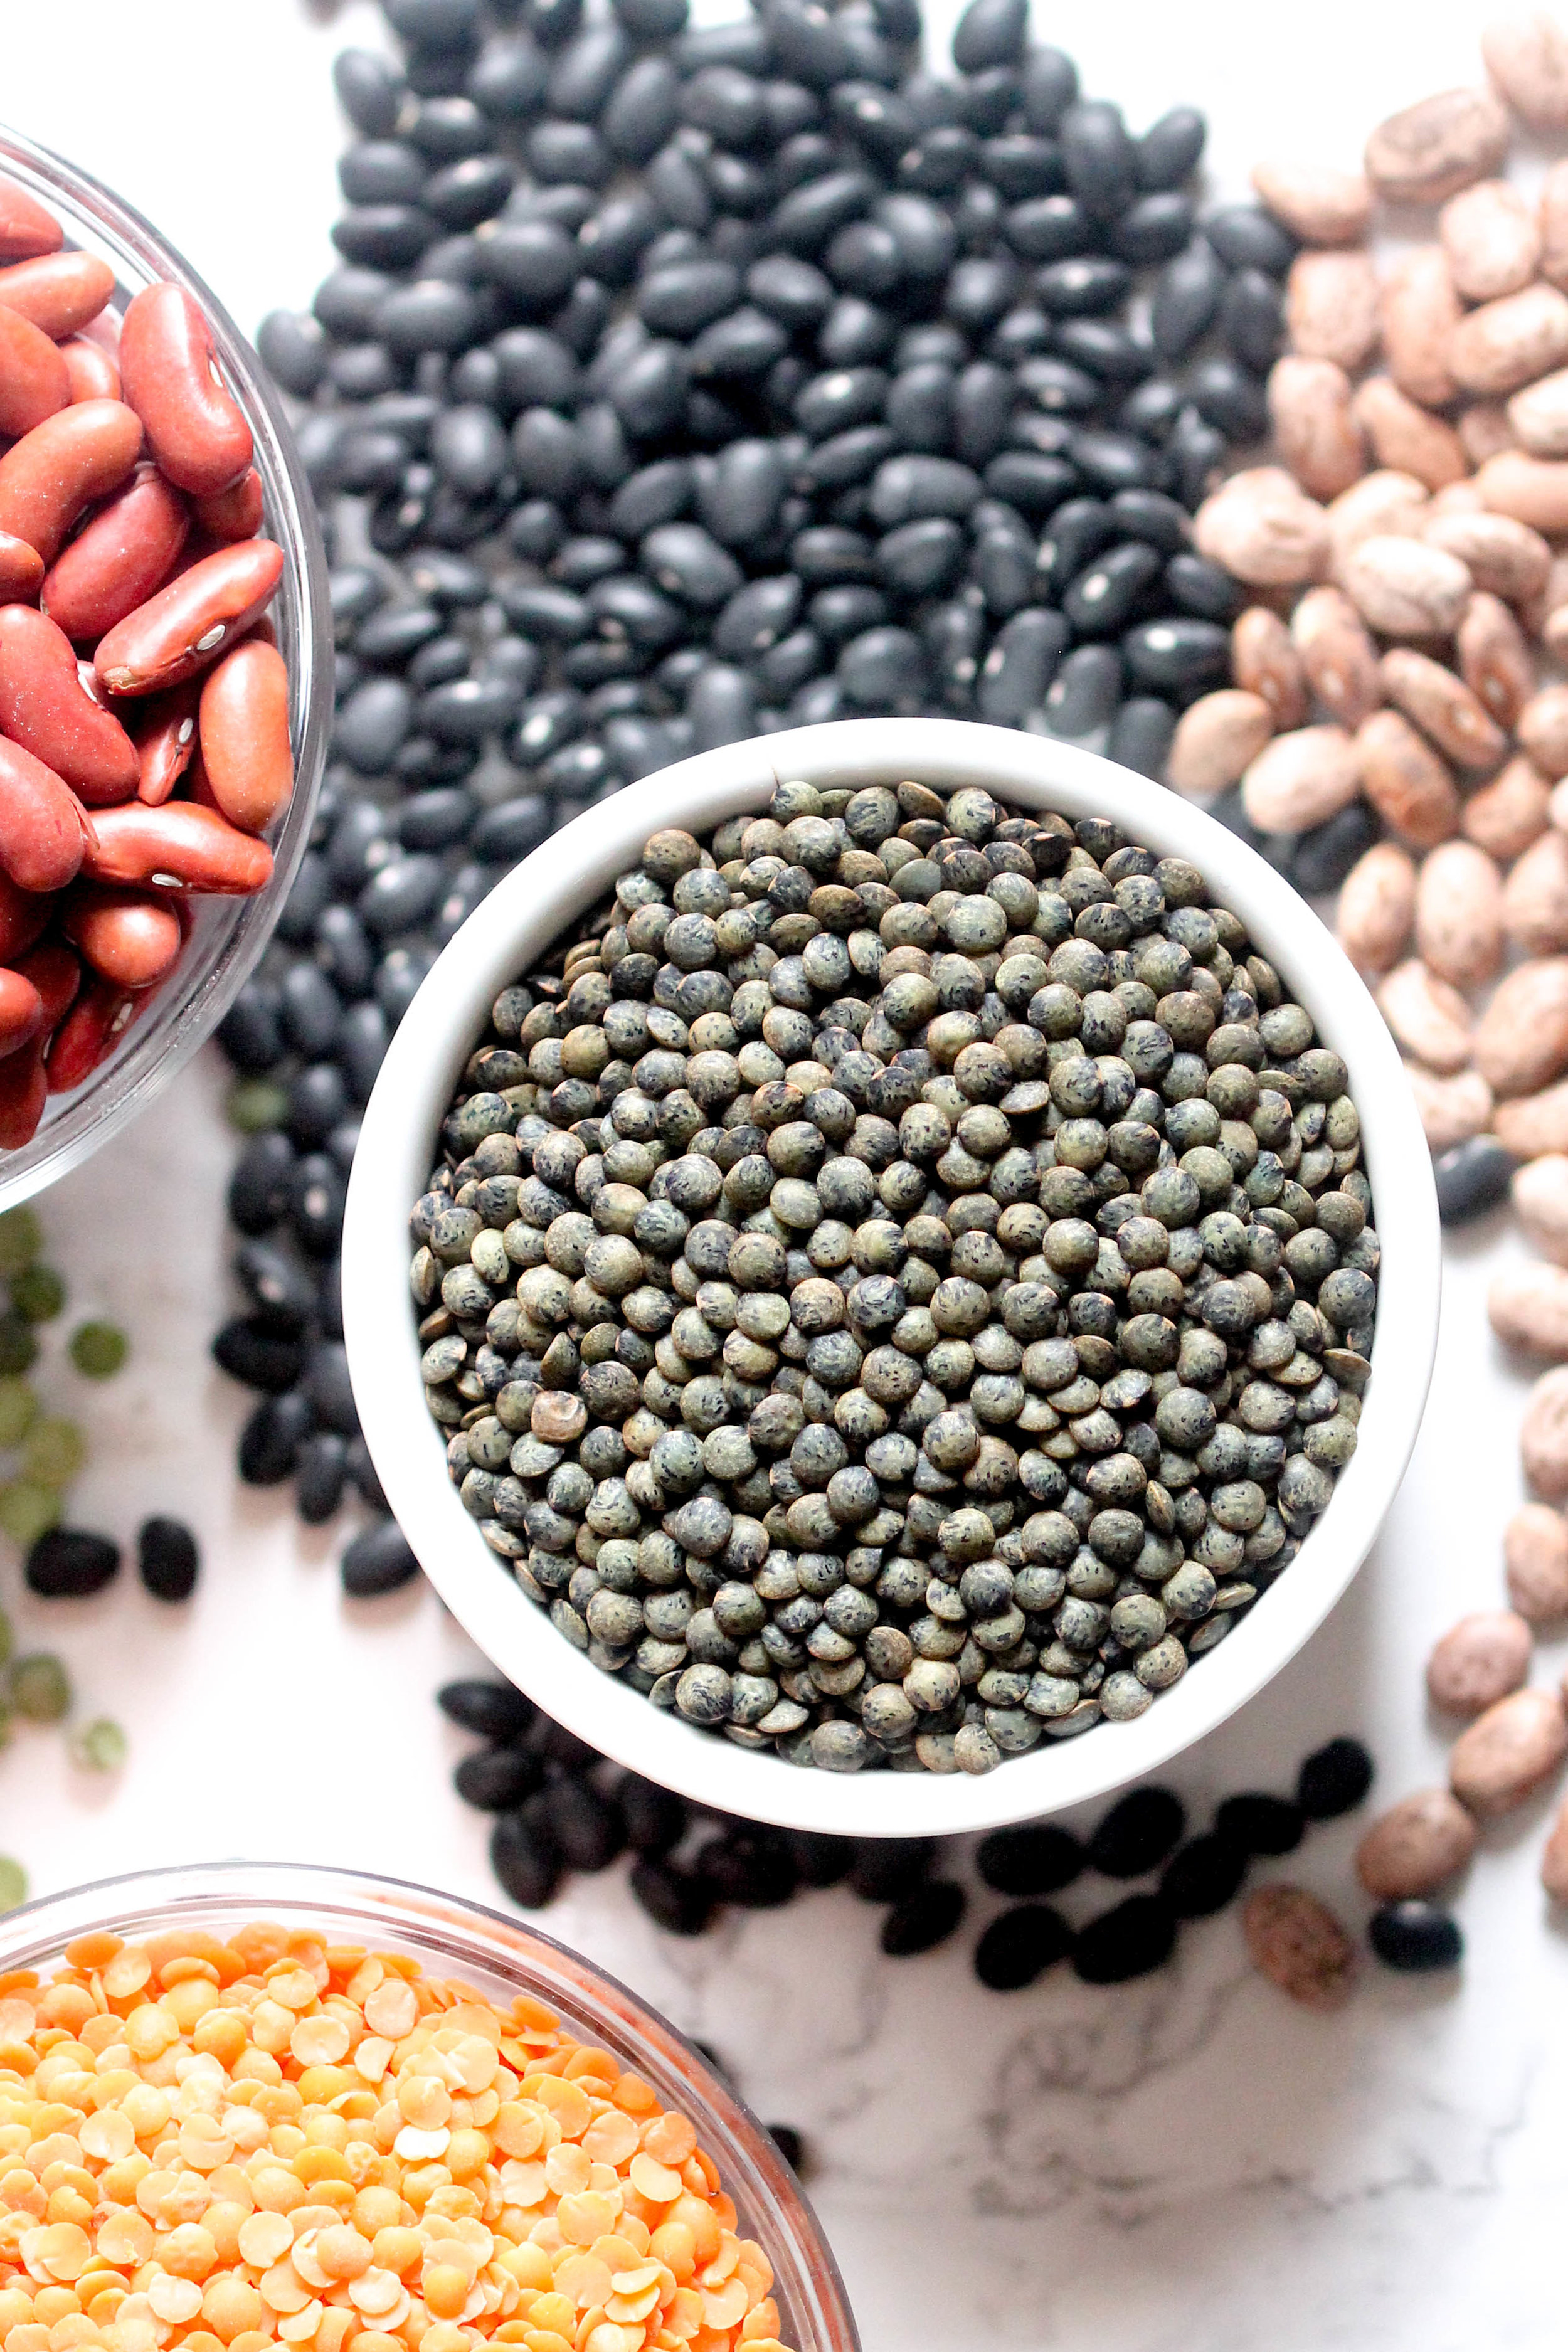 Importance of Legumes